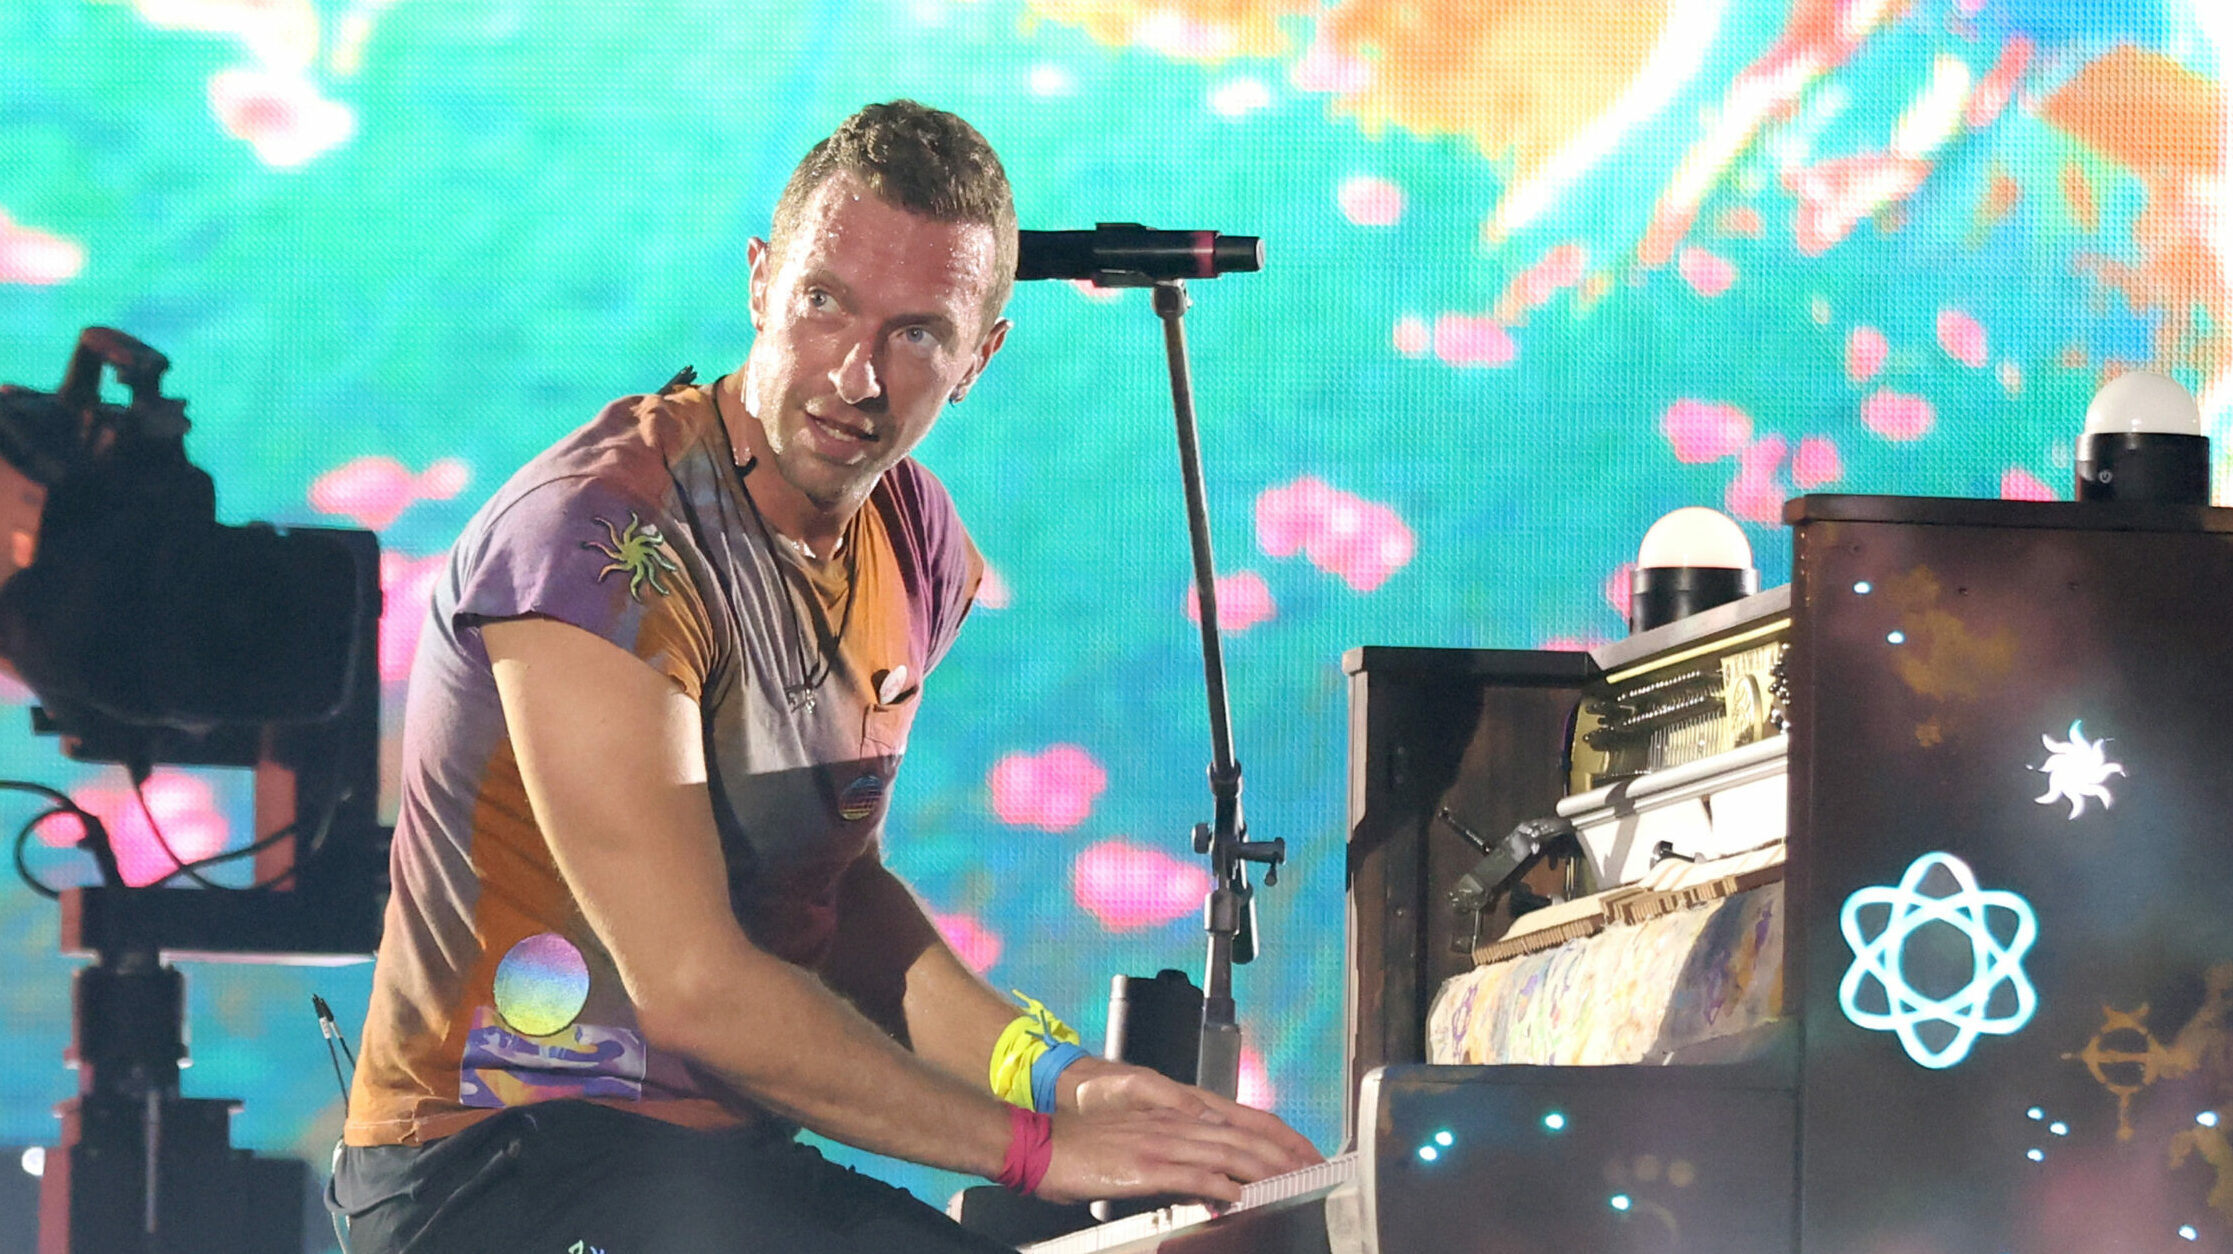 Coldplay concert during Music of the Spheres tour in England